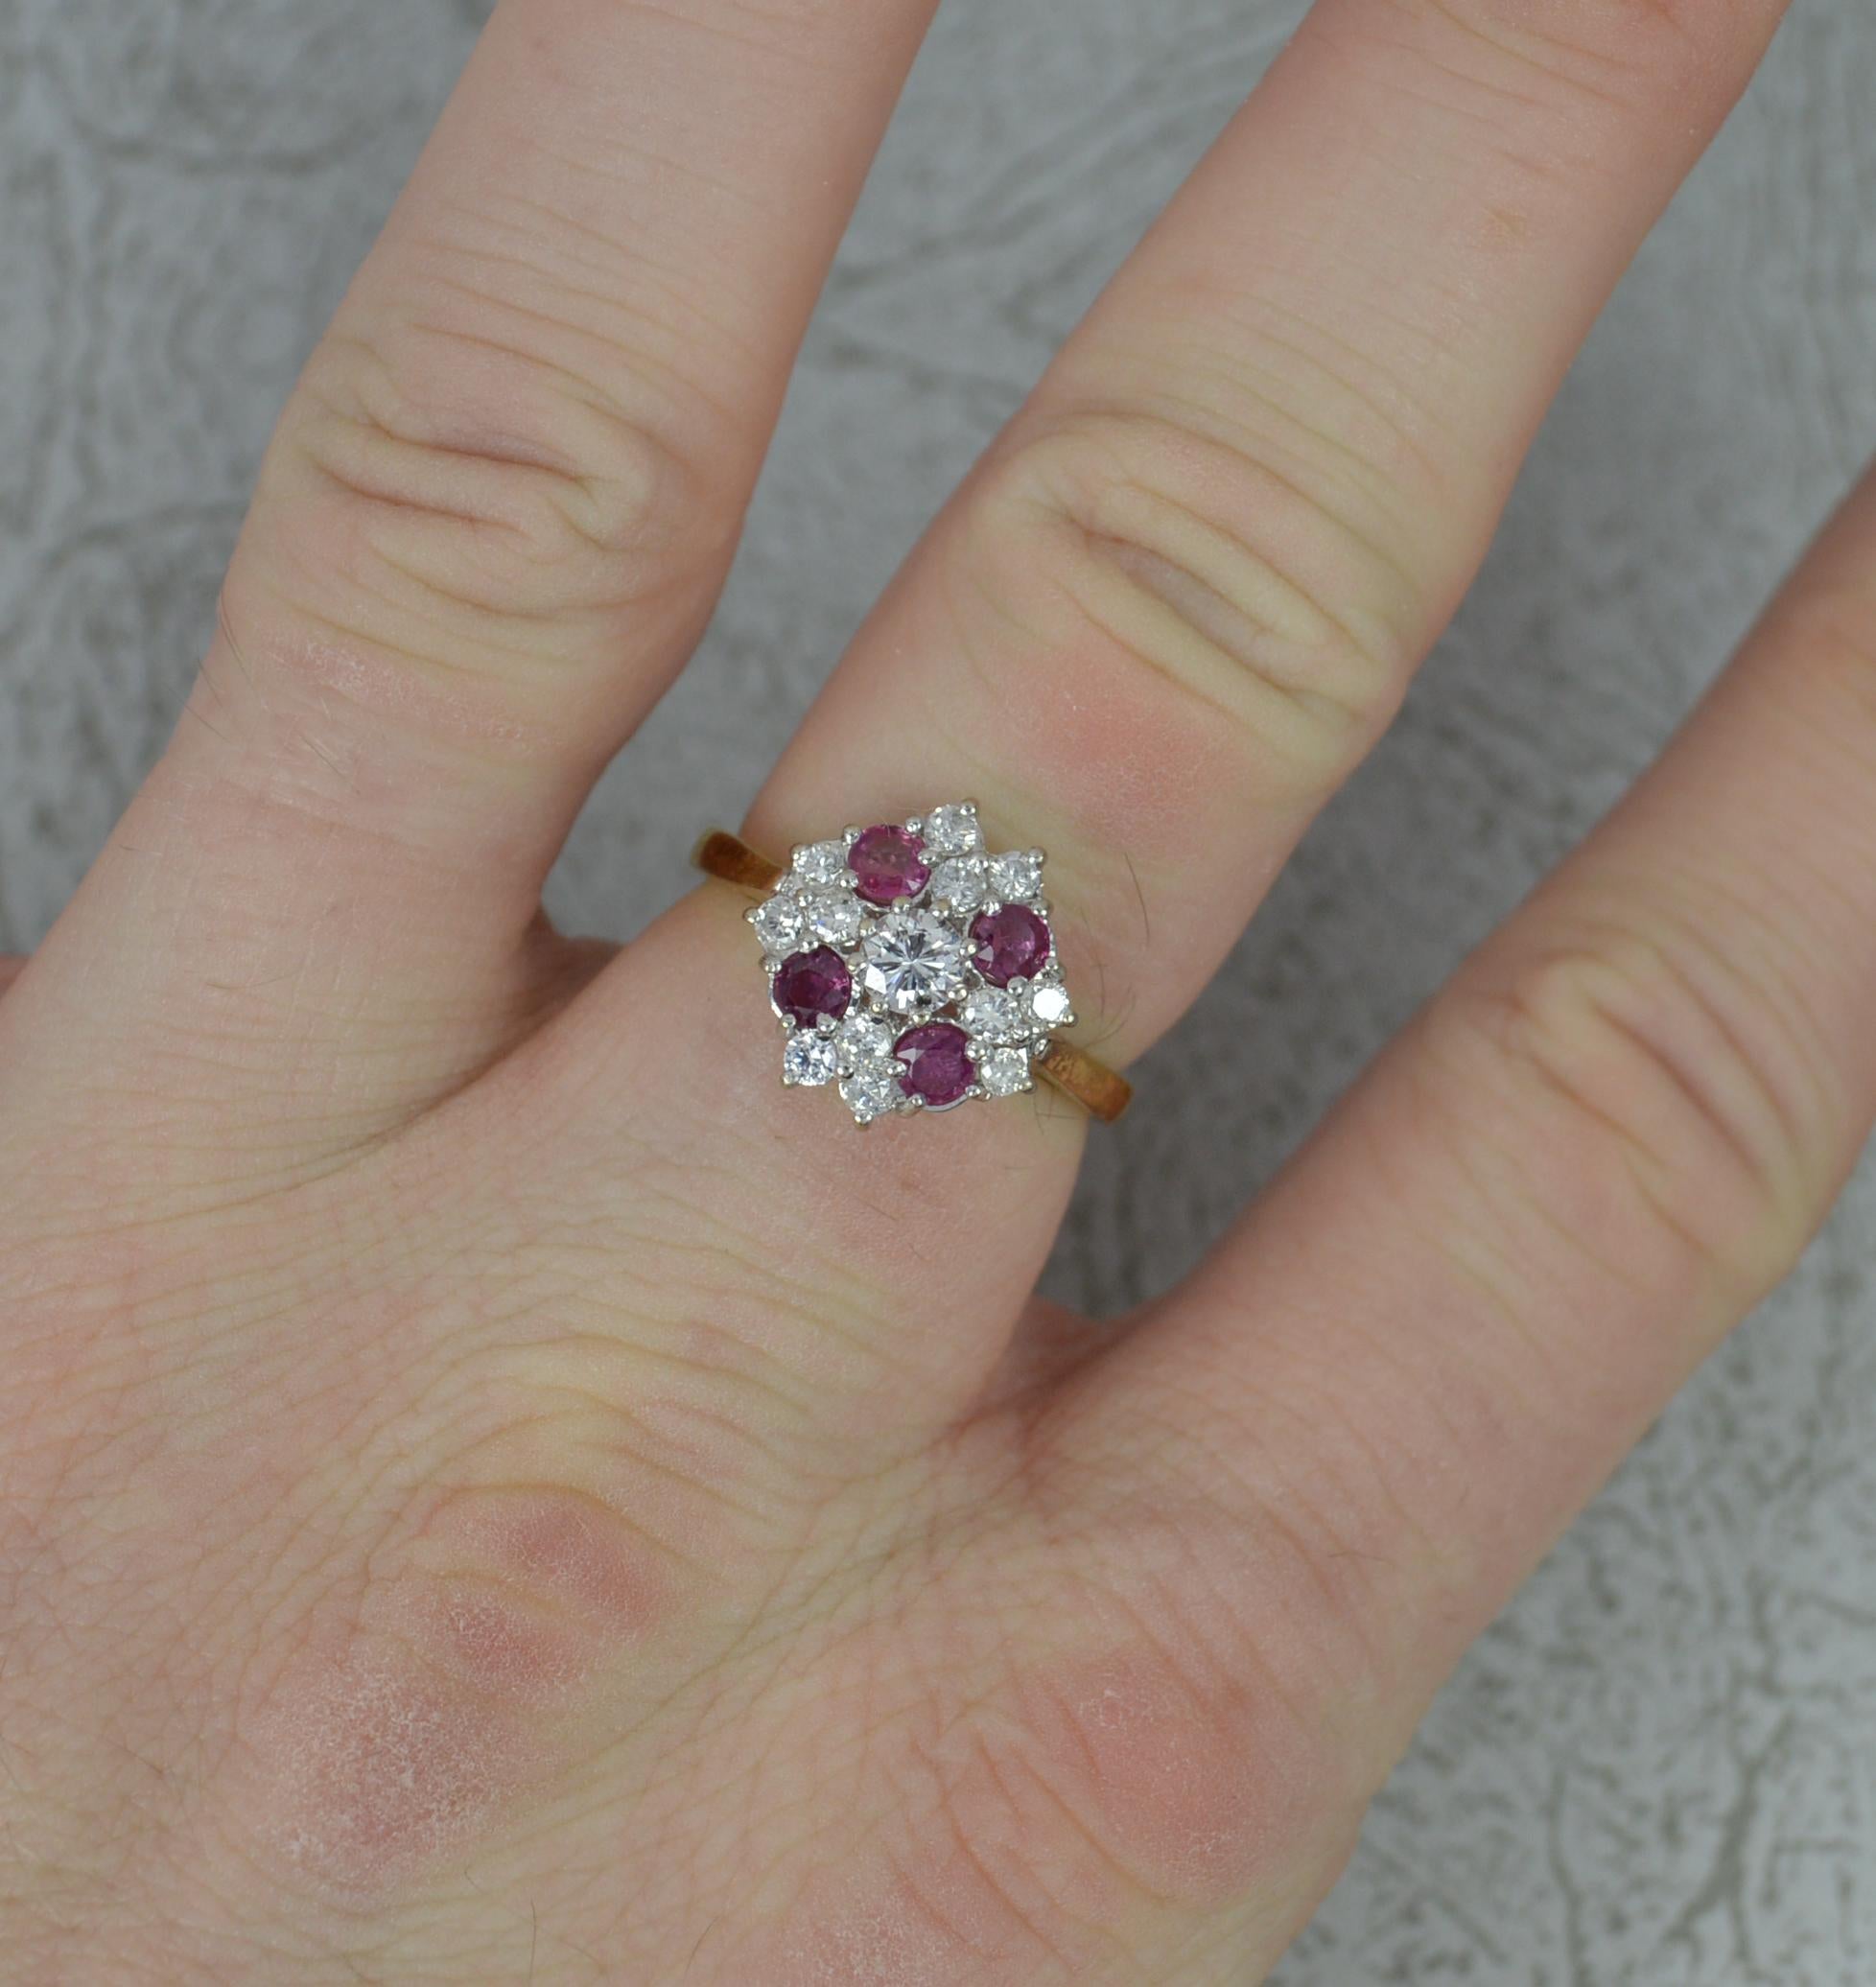 A striking vintage cluster ring.
Solid 18 carat yellow gold shank, white gold head.
Designed with a larger round brilliant cut diamond to centre. Surrounding are twelve small round brilliant cut diamonds and four vibrant pinky red rubies. All